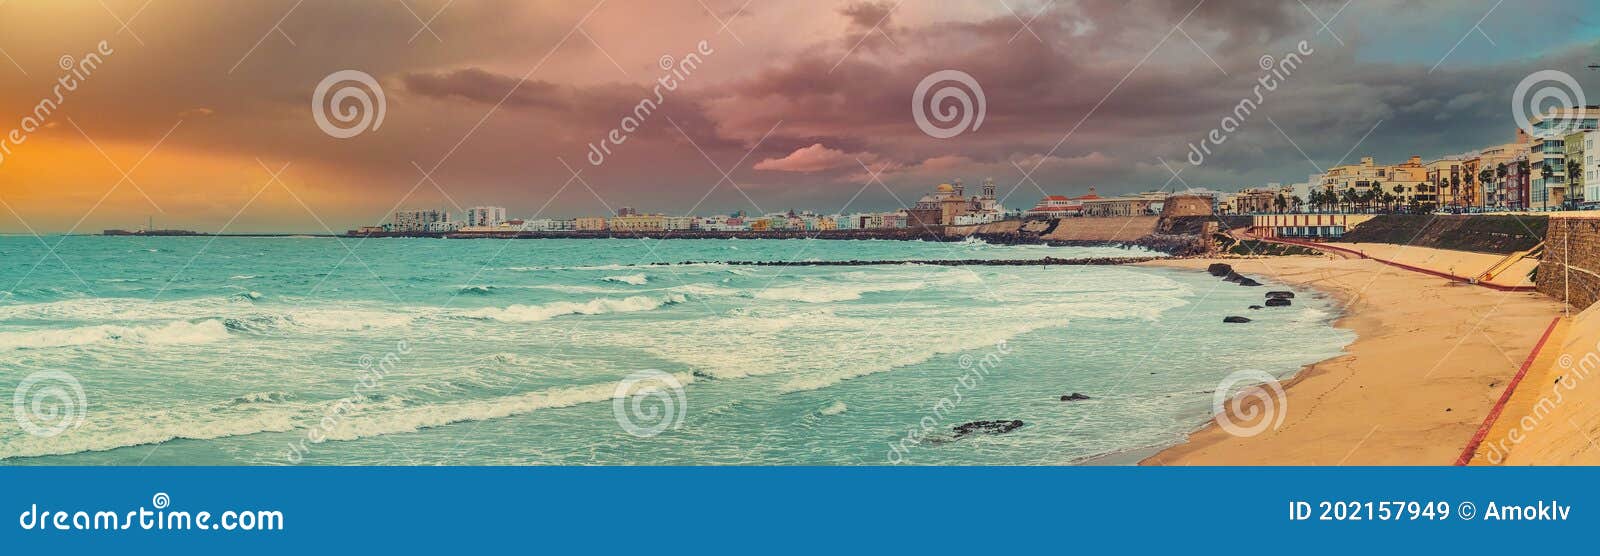 panoramic view of cadiz townscape during sunset. spain